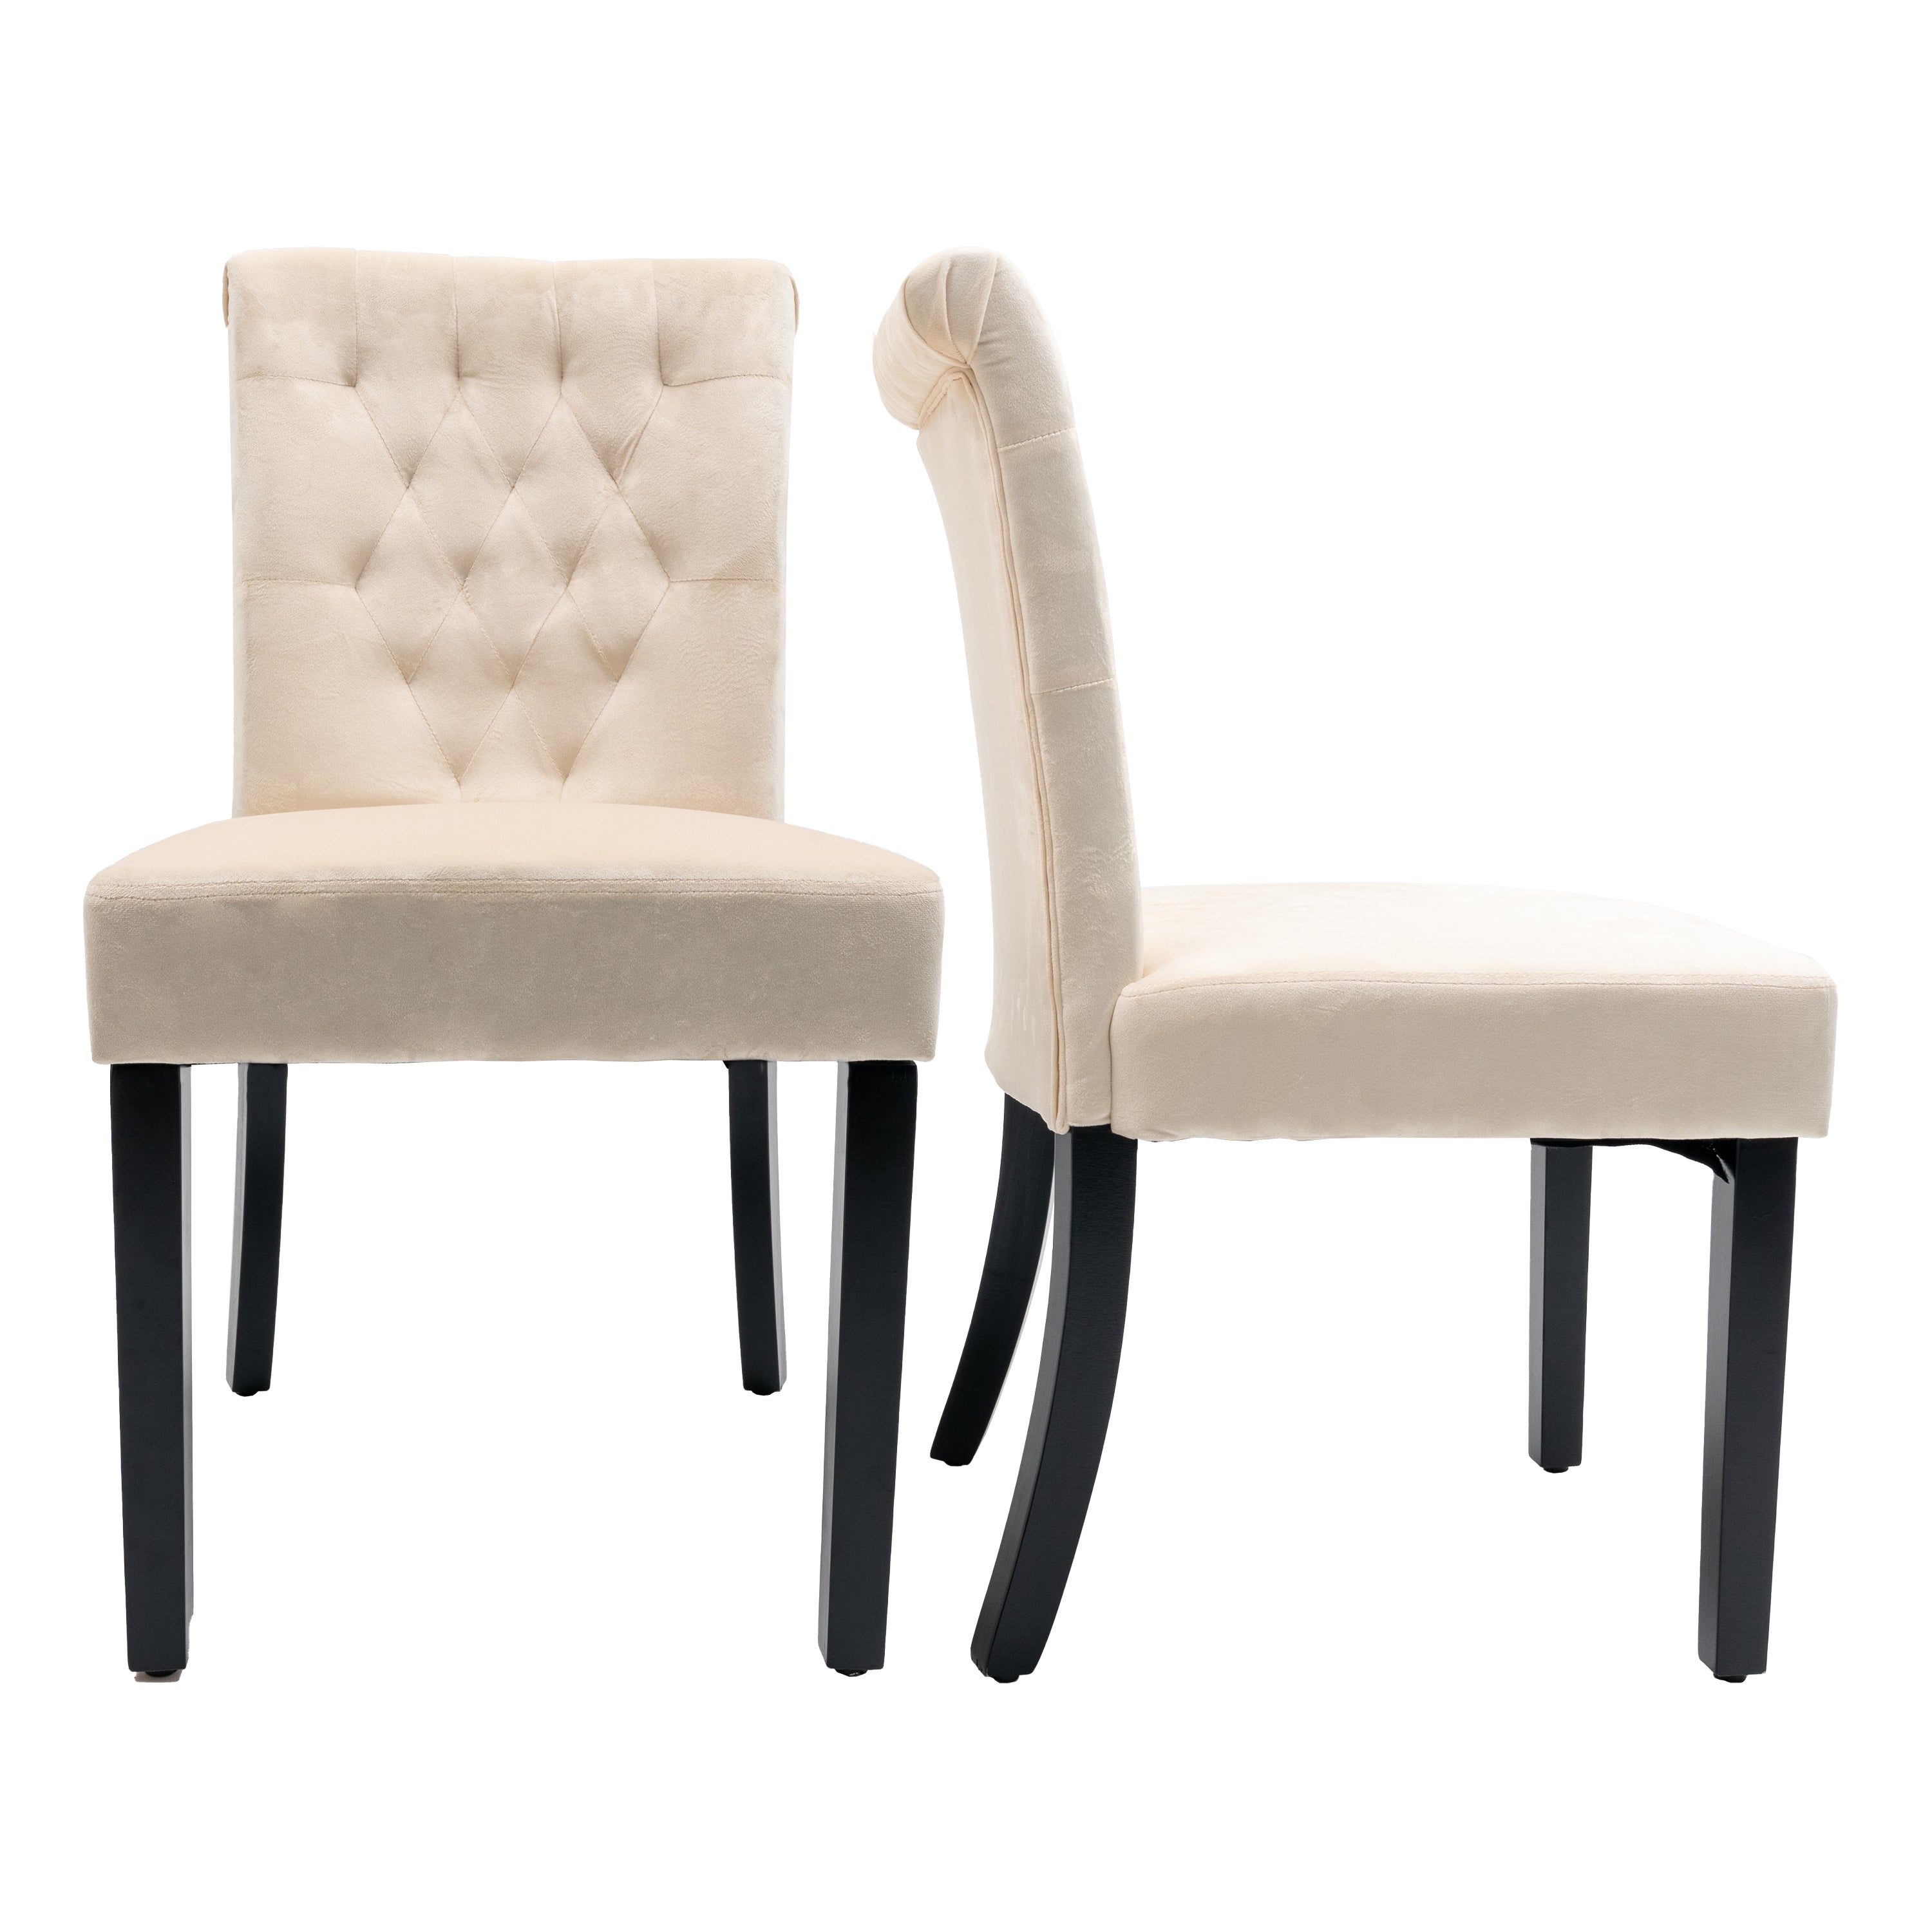 Velvet Dining Chair Set Tufted Heigh Back with Solid Wood Frame Accent Chairs (Set of 2) -  Beige